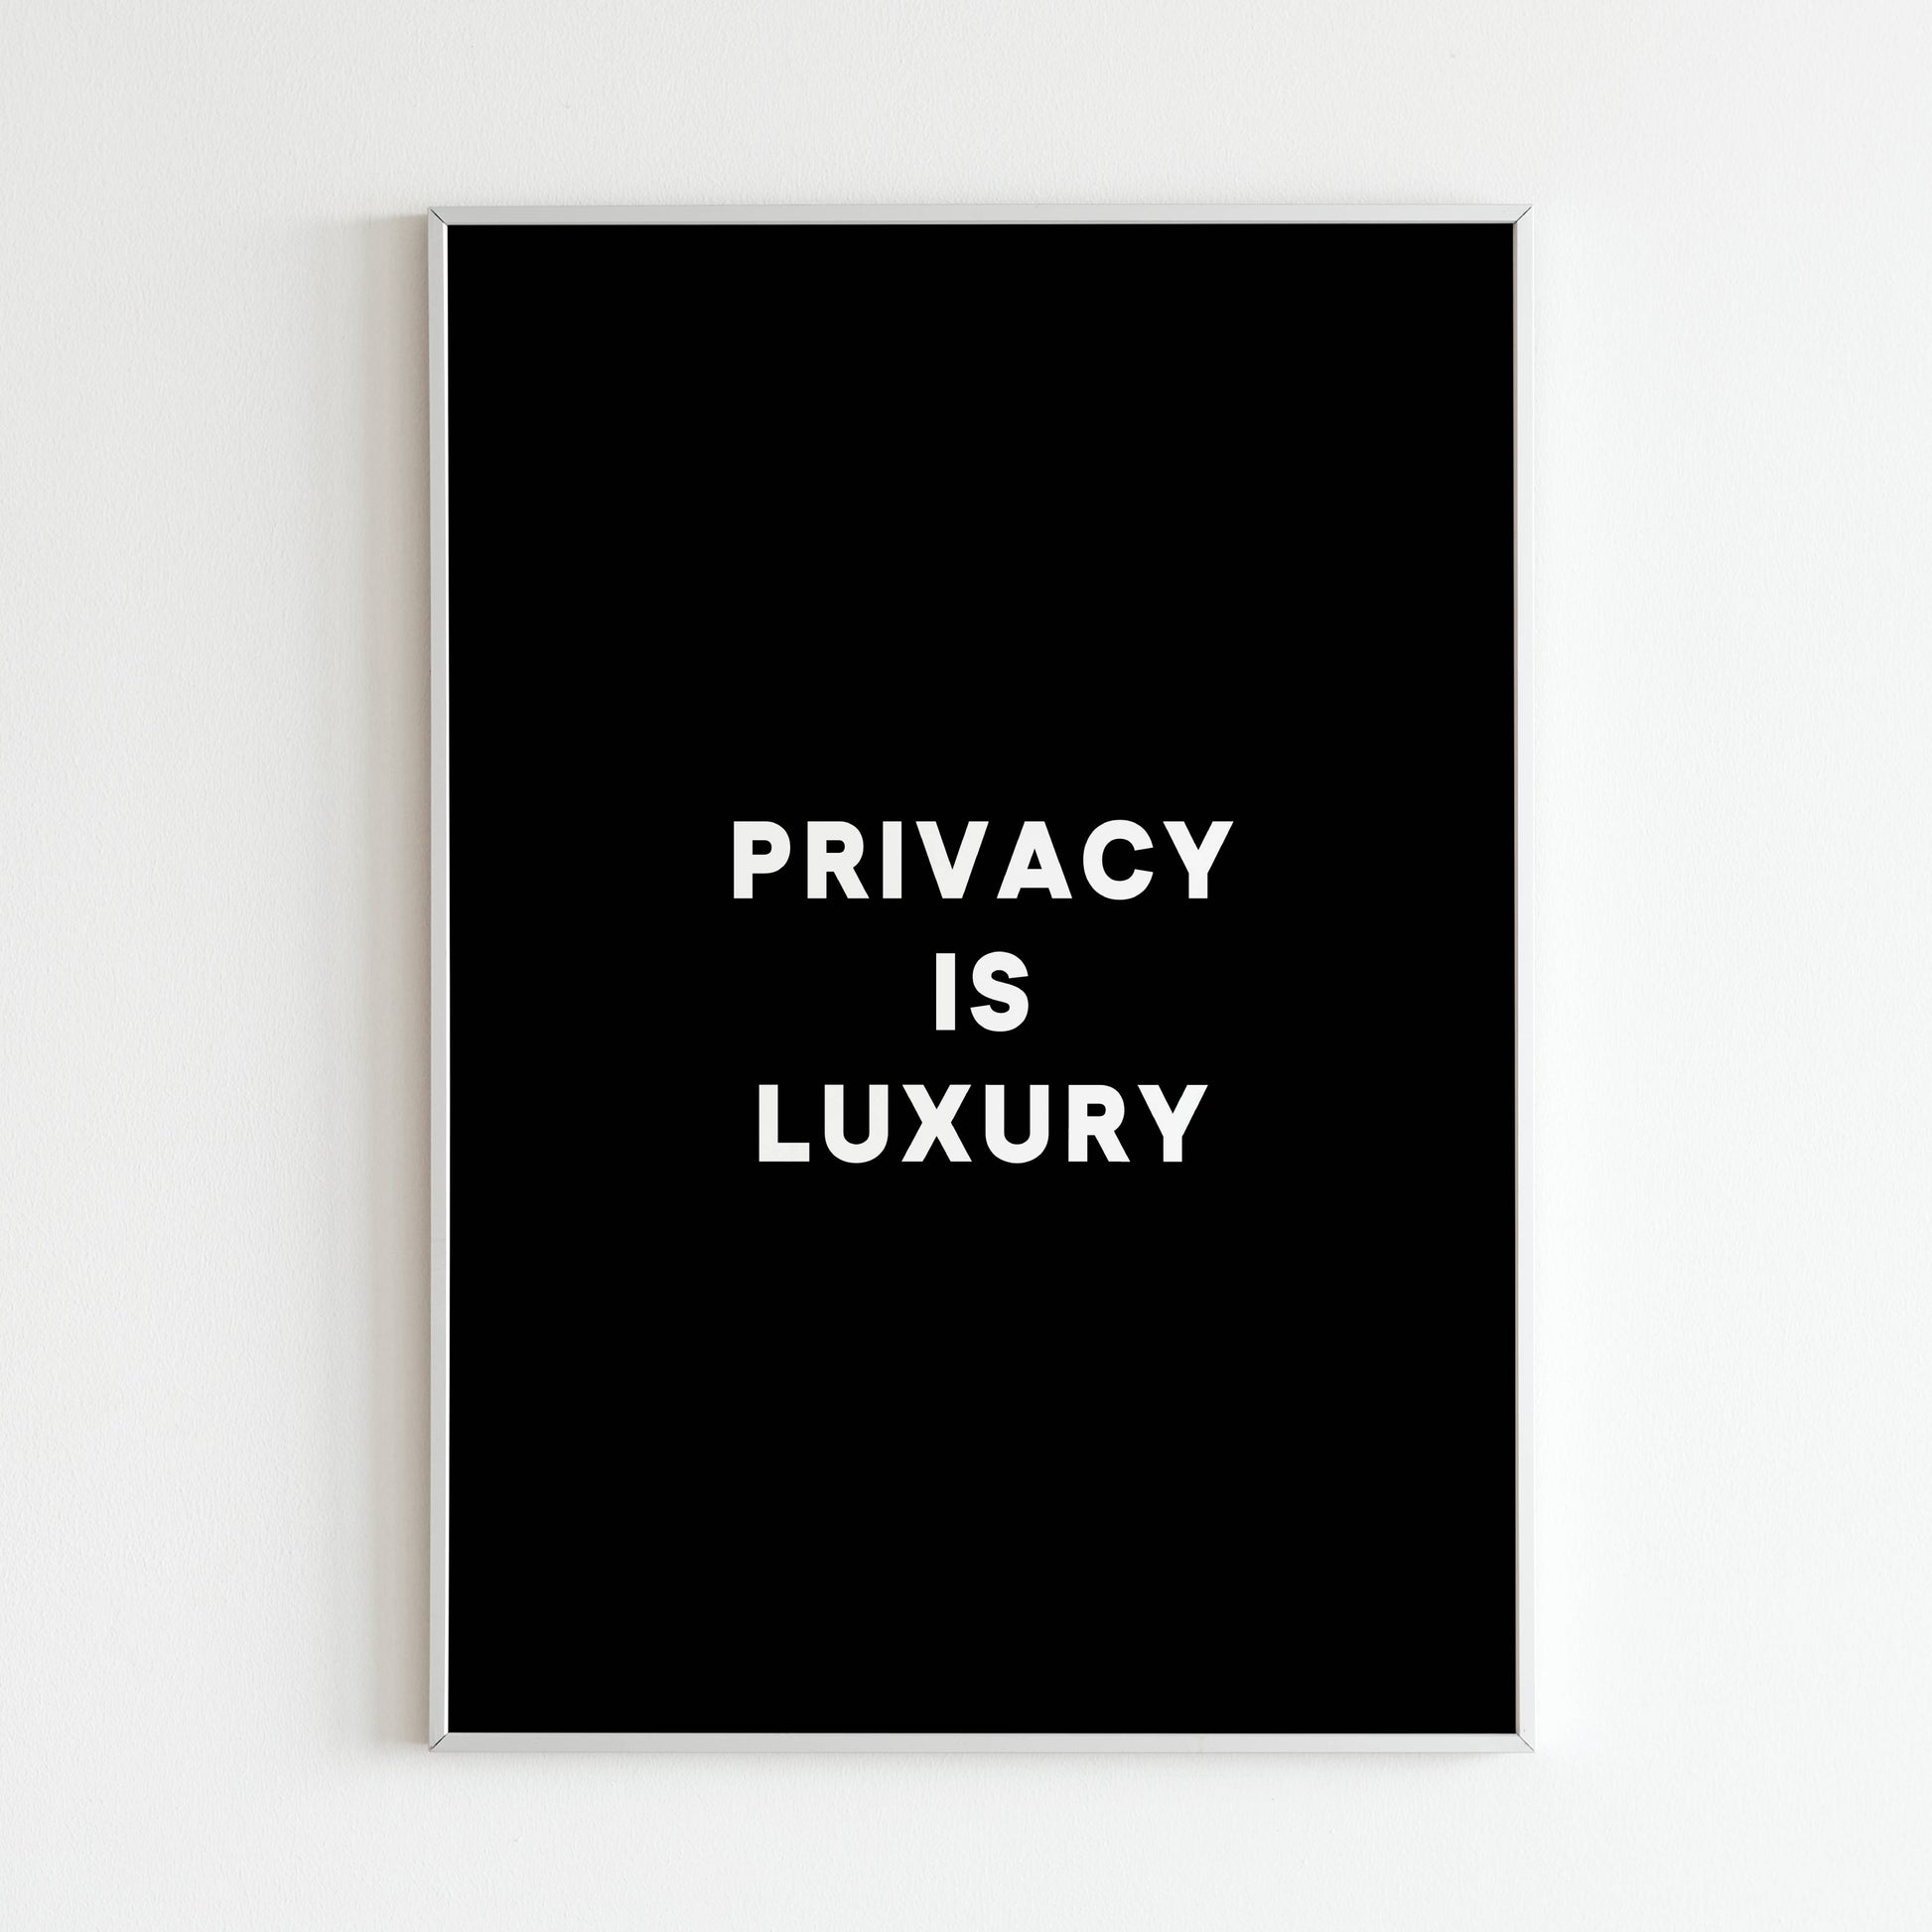 Downloadable "Privacy is luxury" wall art for a thought-provoking message.